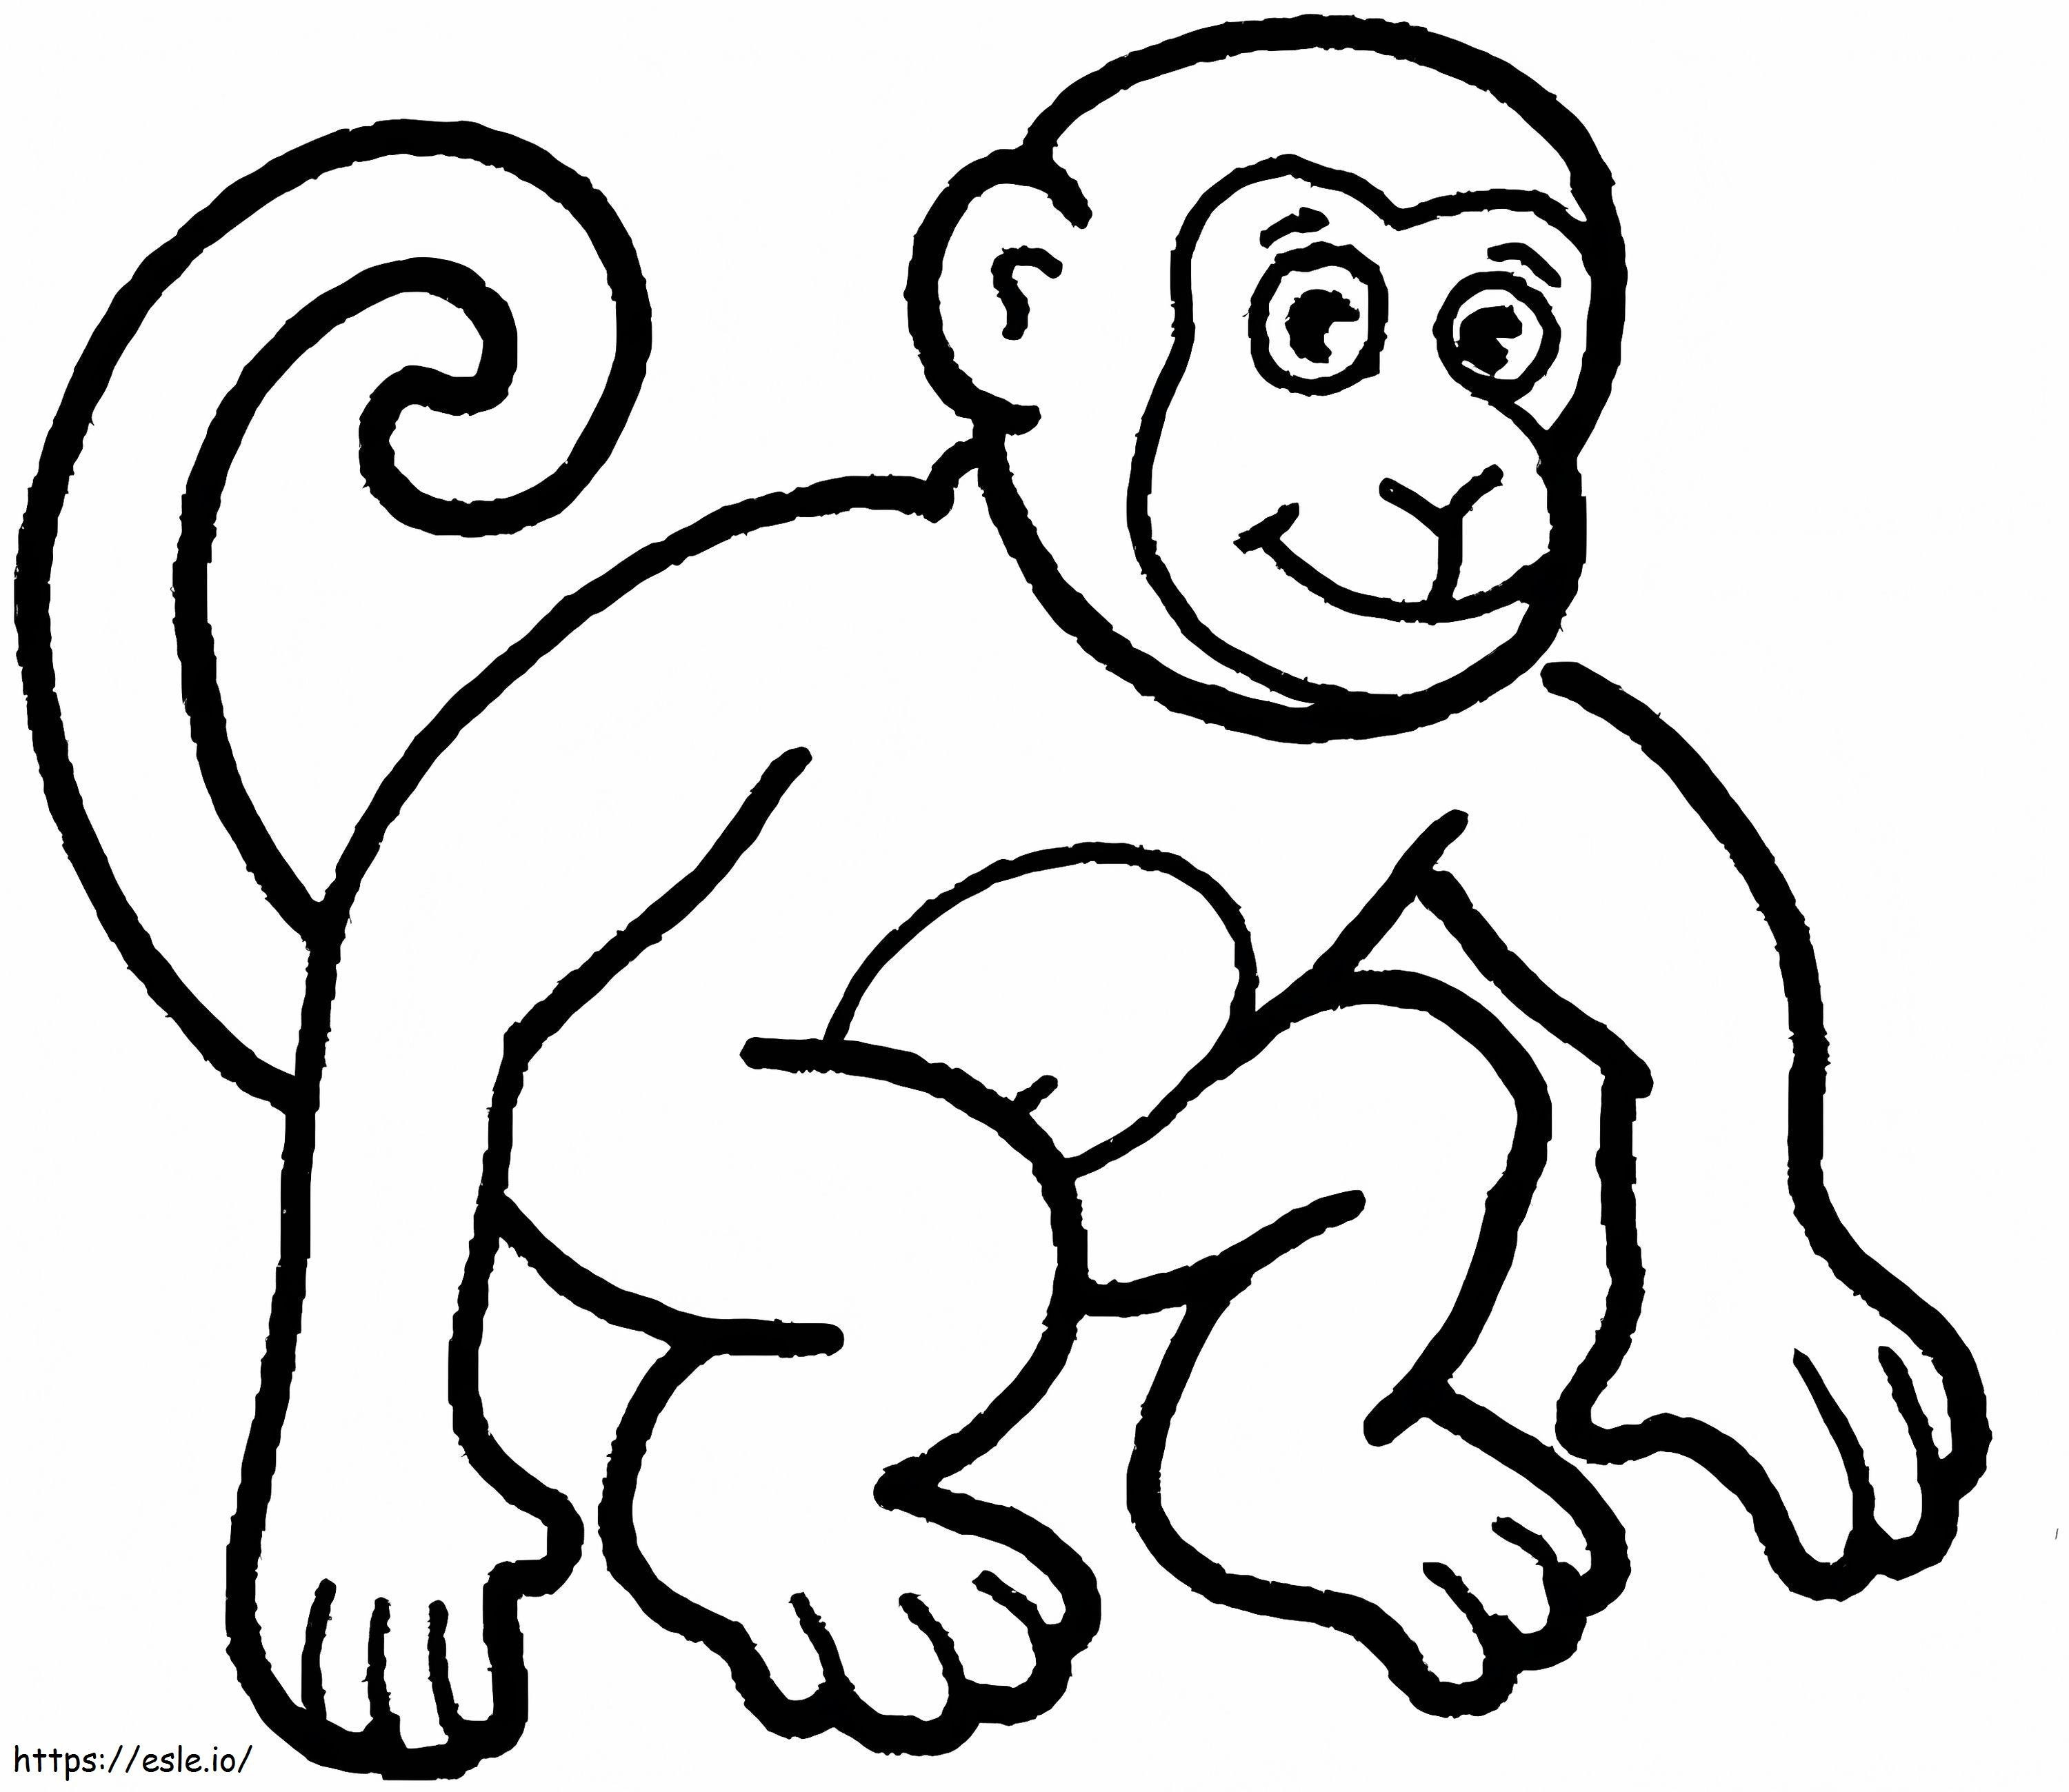 A Monkey coloring page